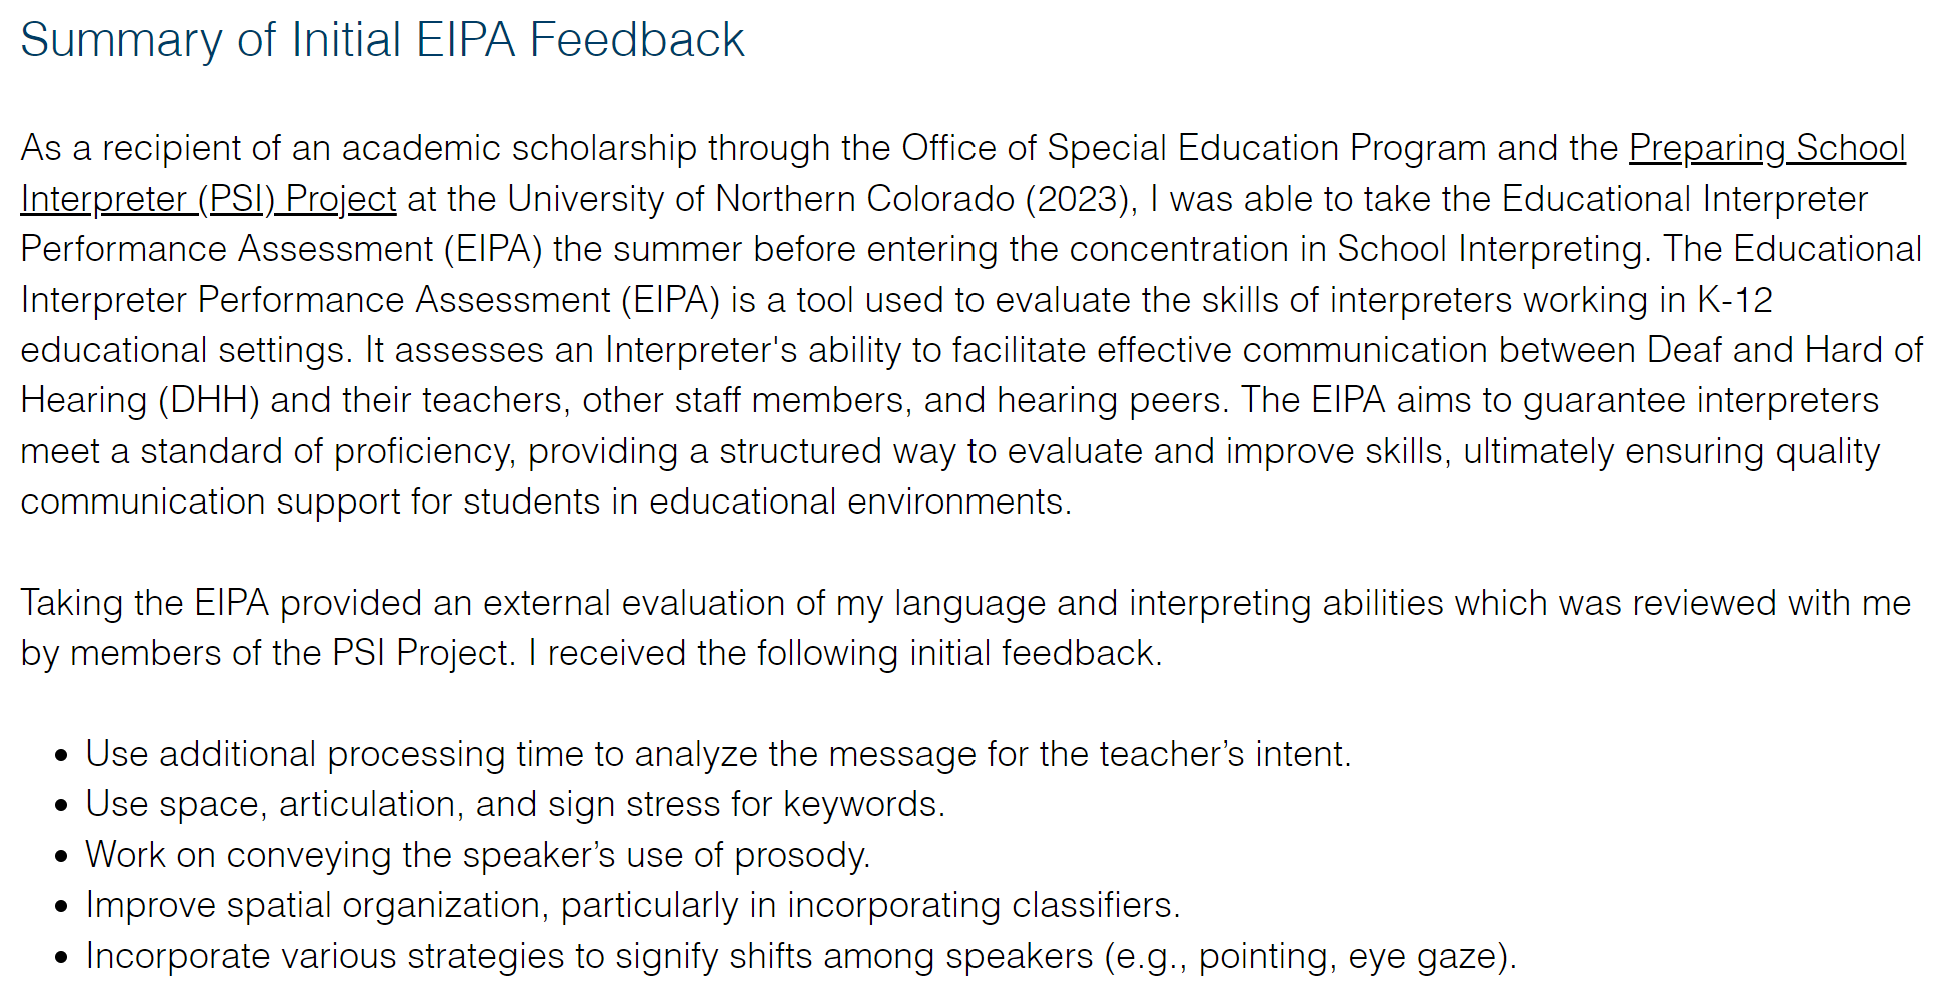 Screenshot of Scholar Si Website for the Summary of Initial EIPA Feedback section